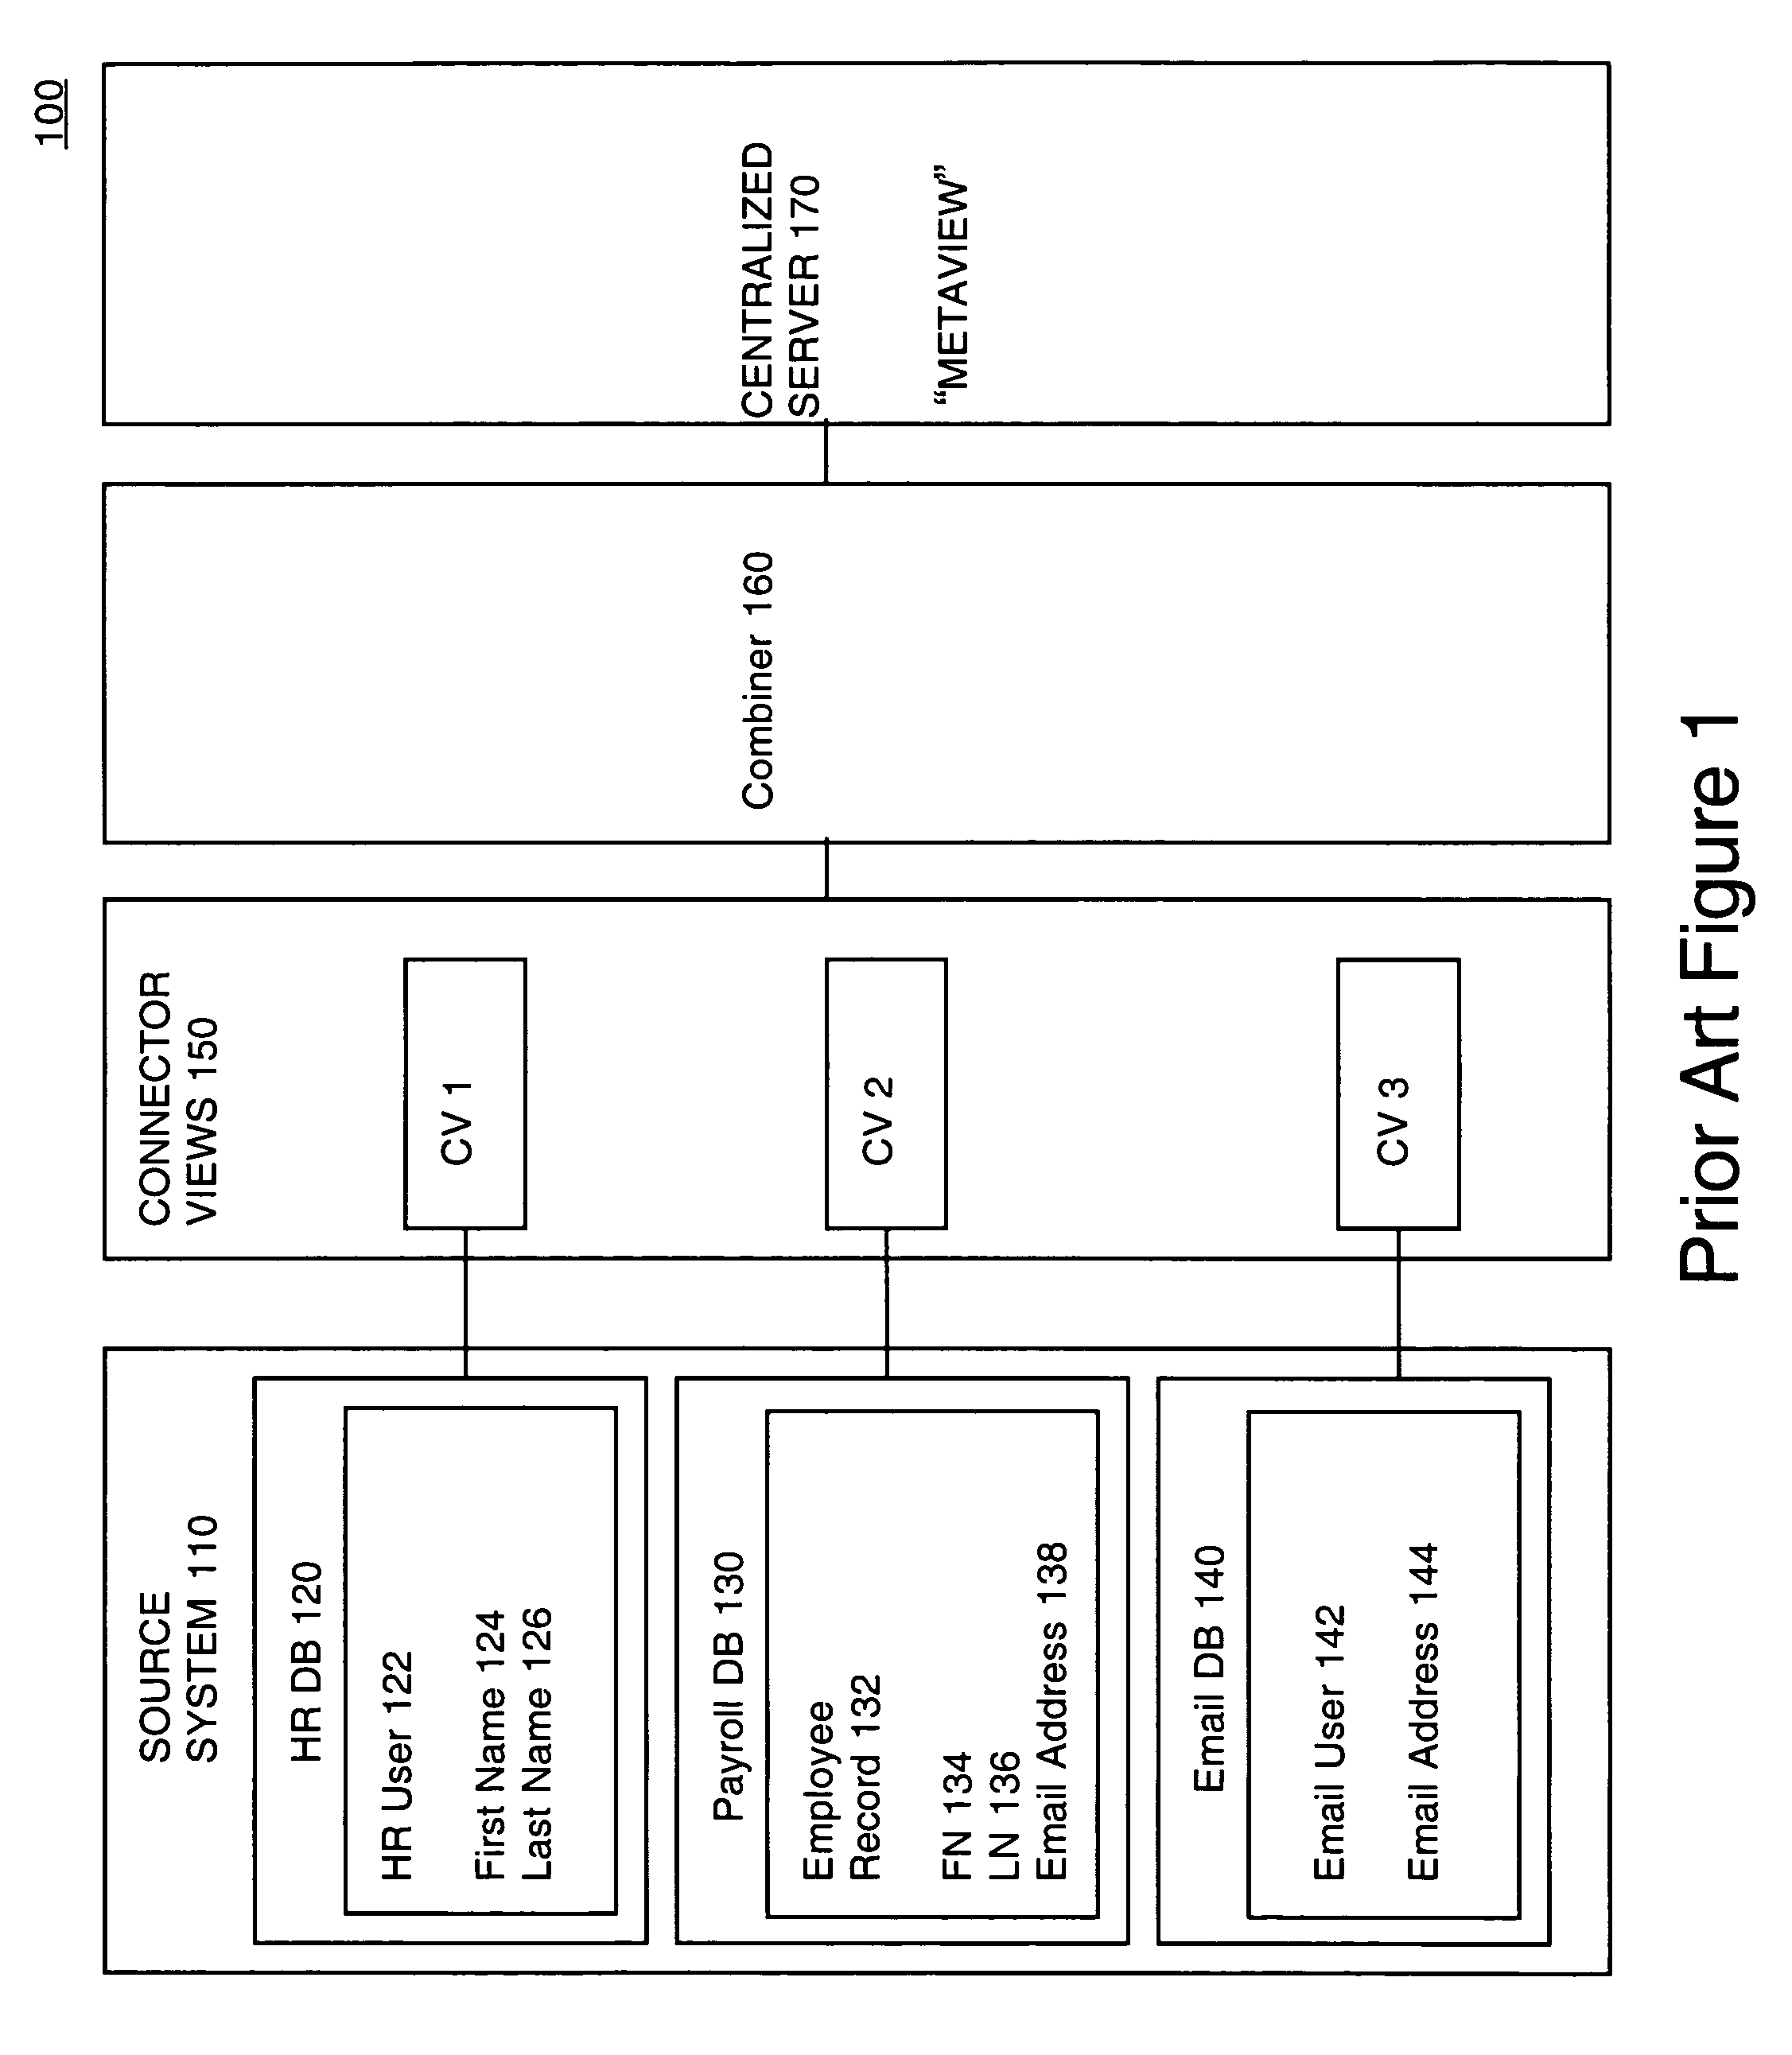 Global attribute mapping data in an enterprise information system